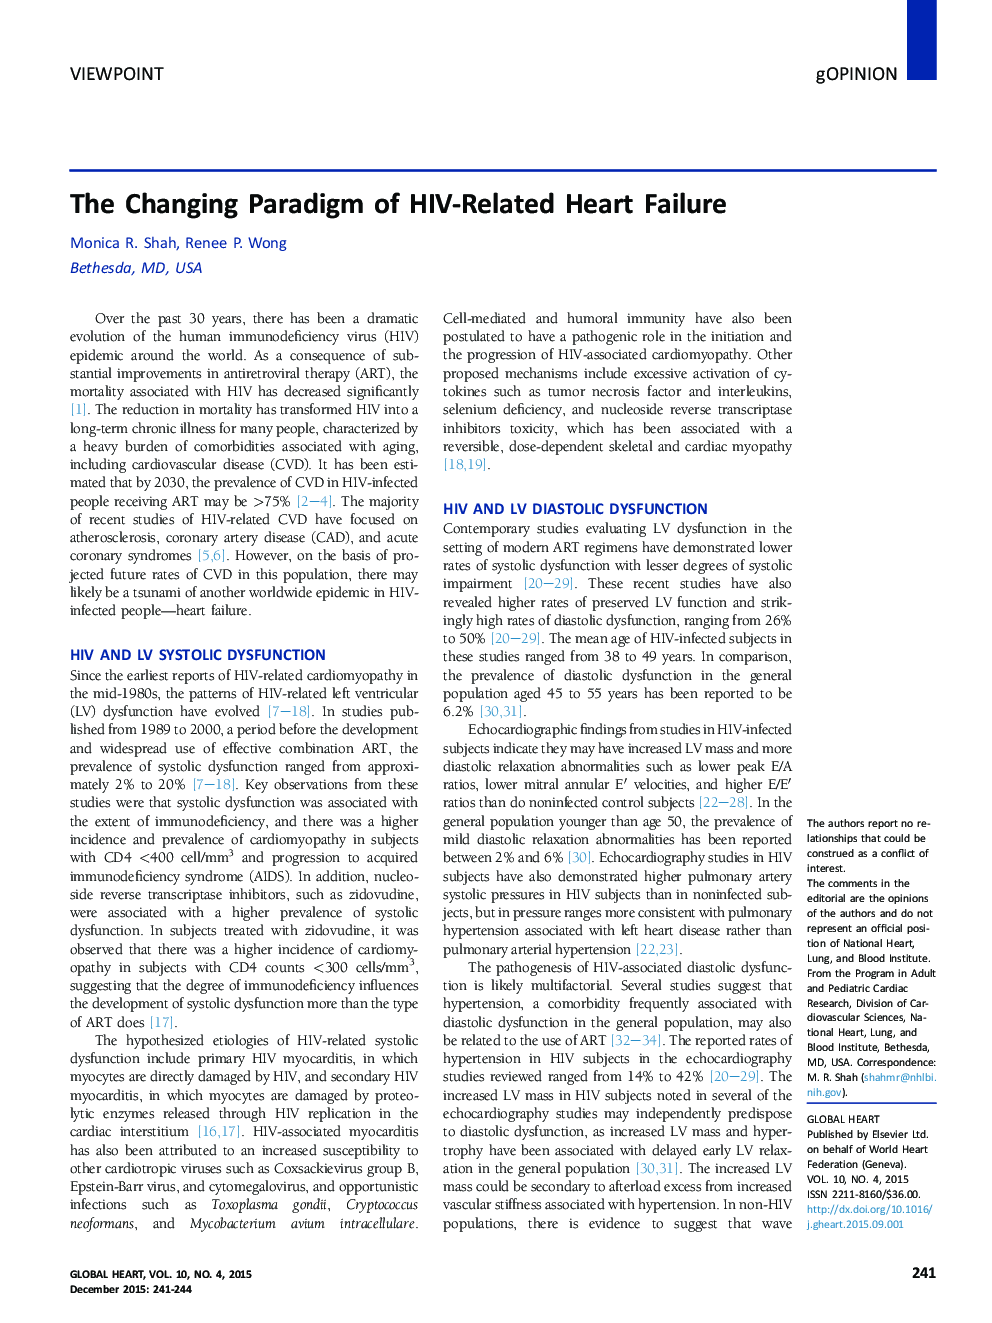 The Changing Paradigm of HIV-Related Heart Failure